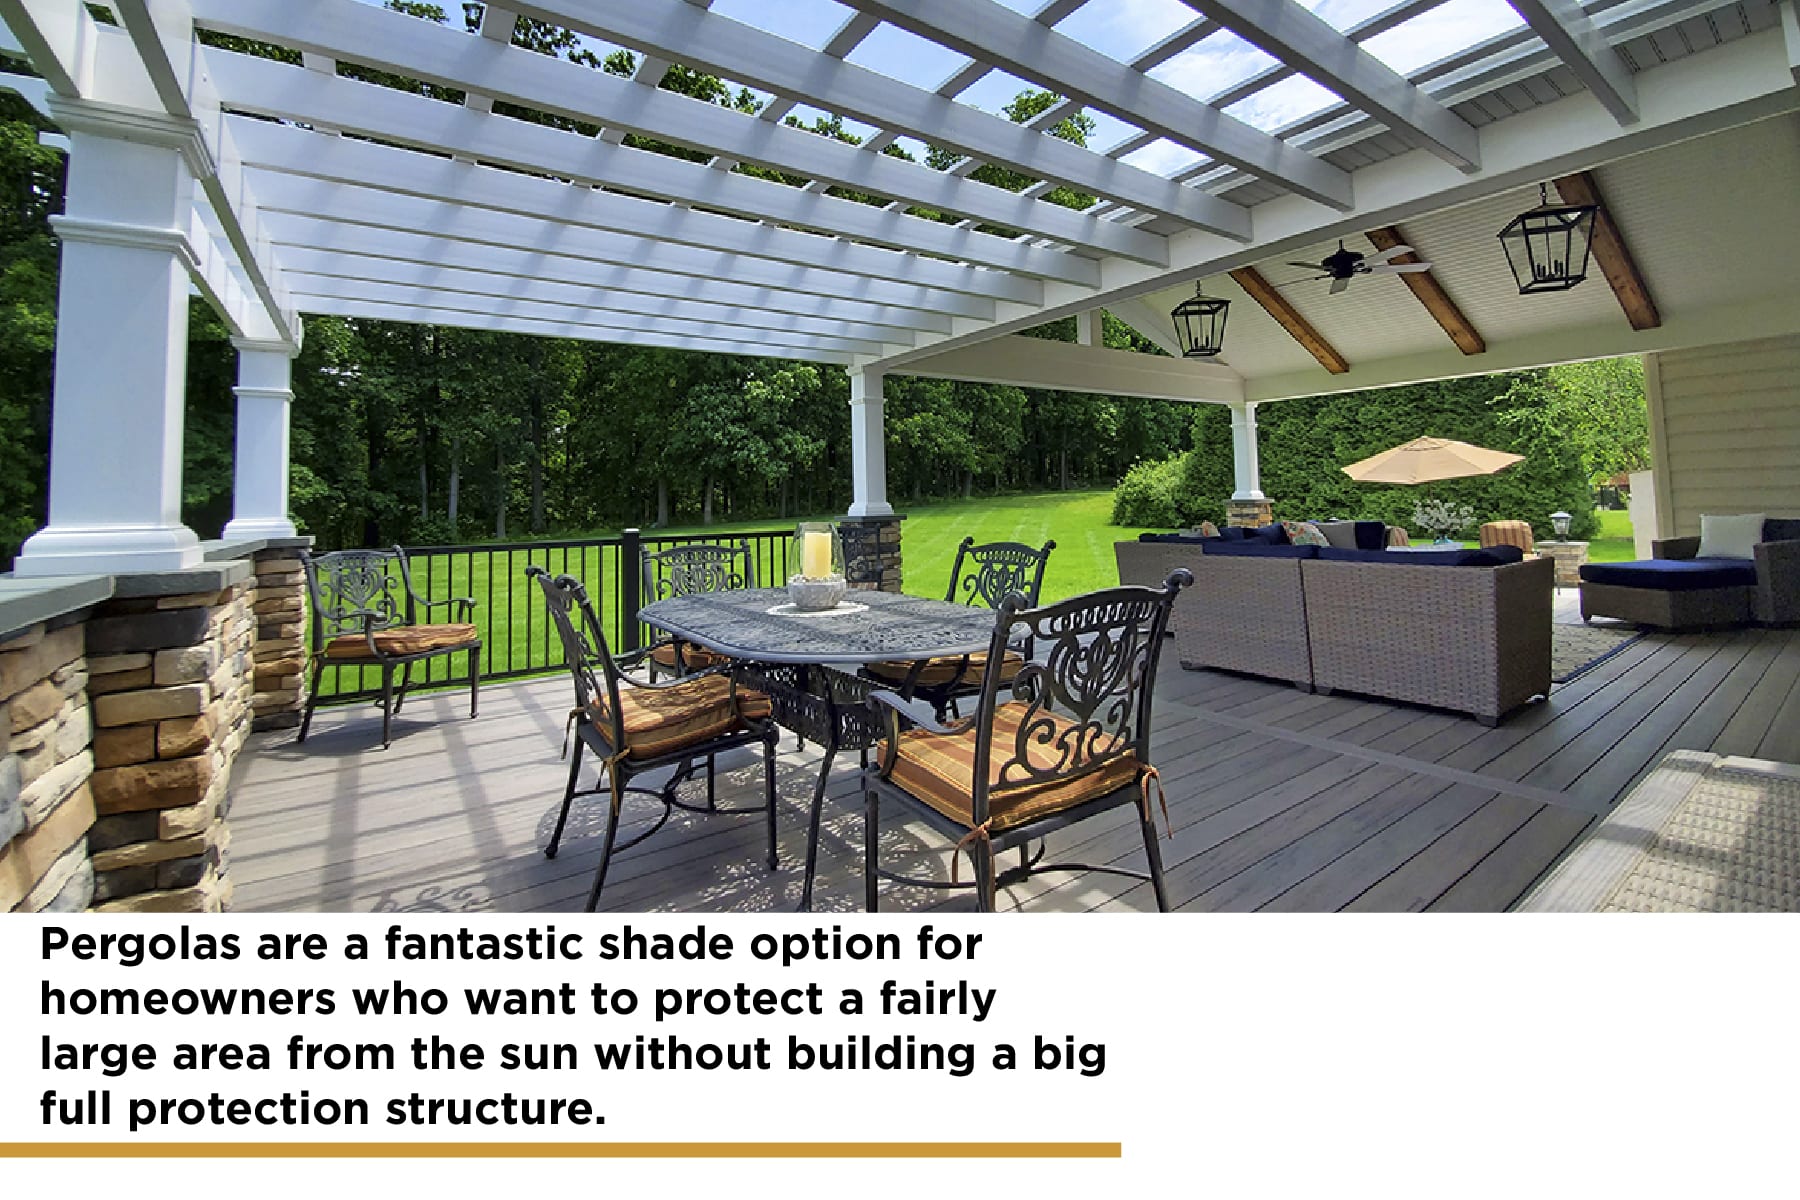 pergolas are an excellent shade structure